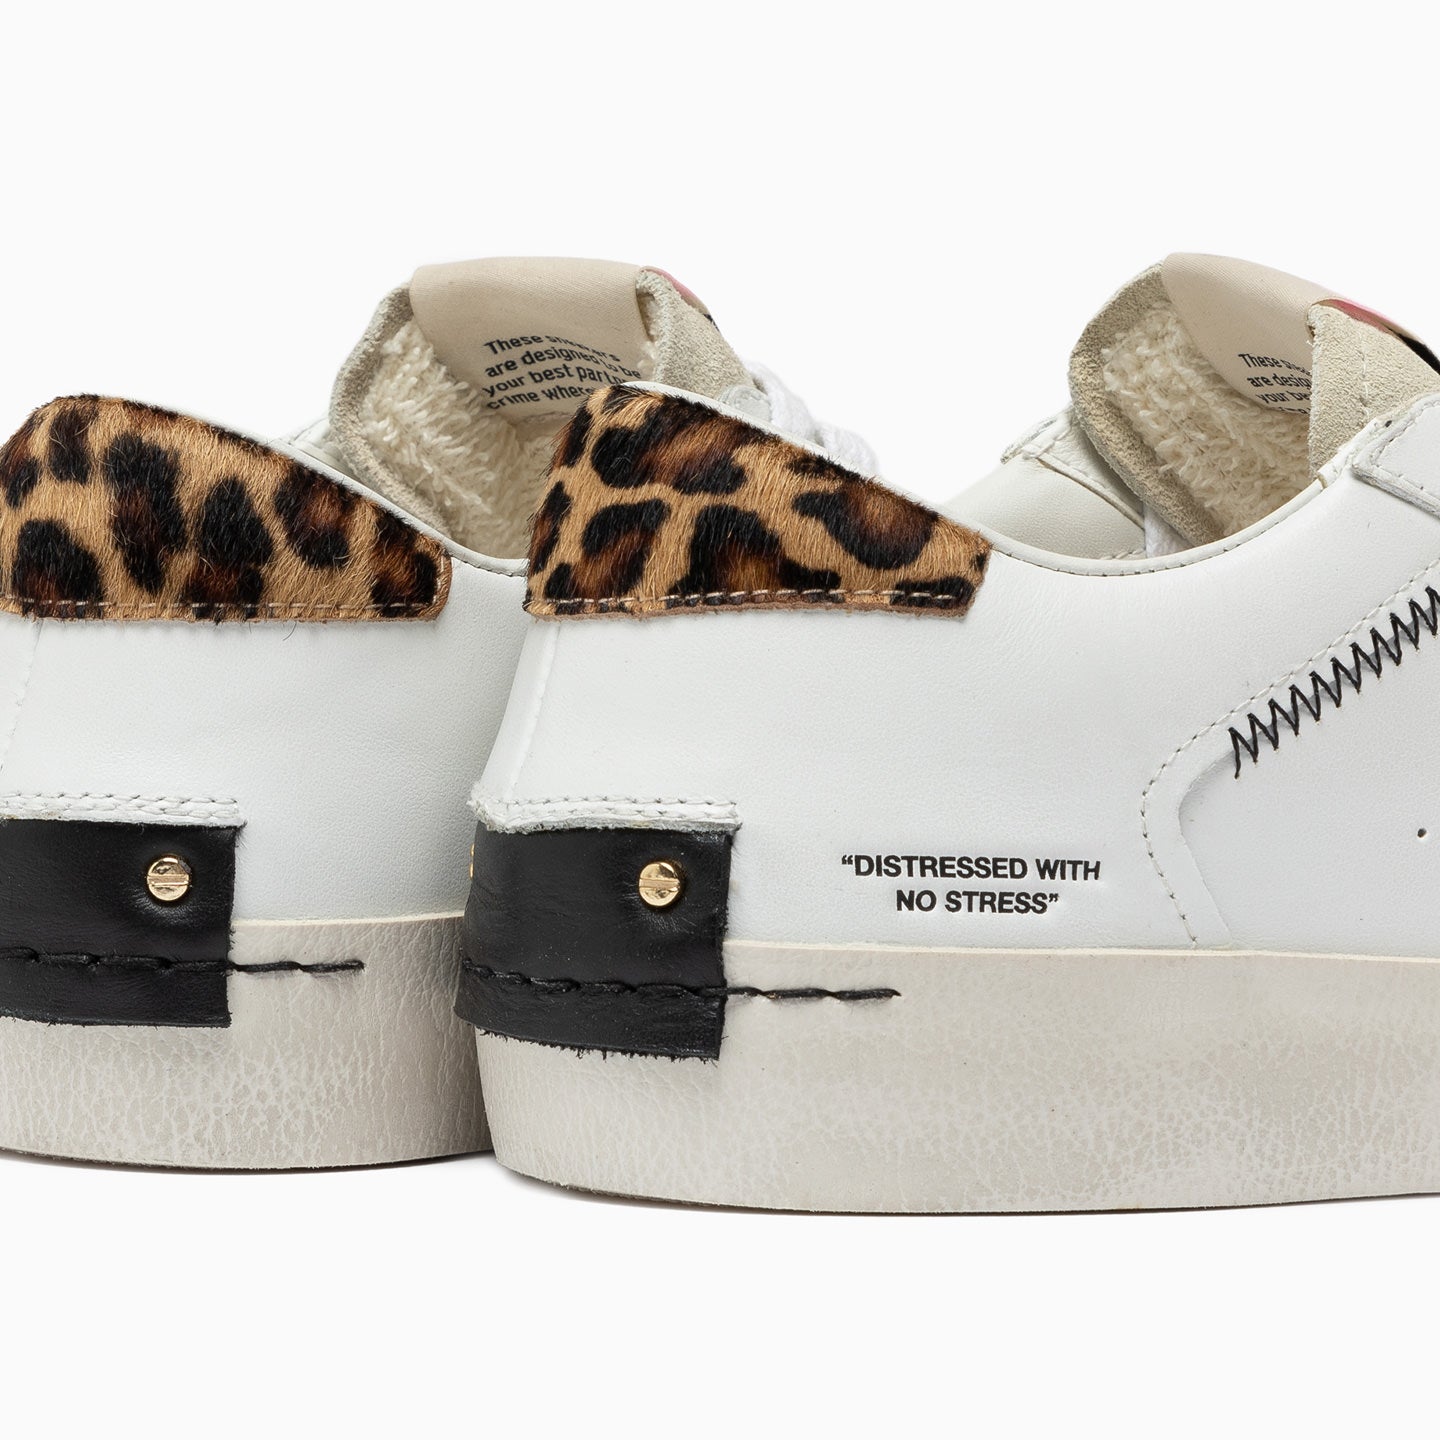 Sneakers Donna - BASSO TOP LEO - Crime London